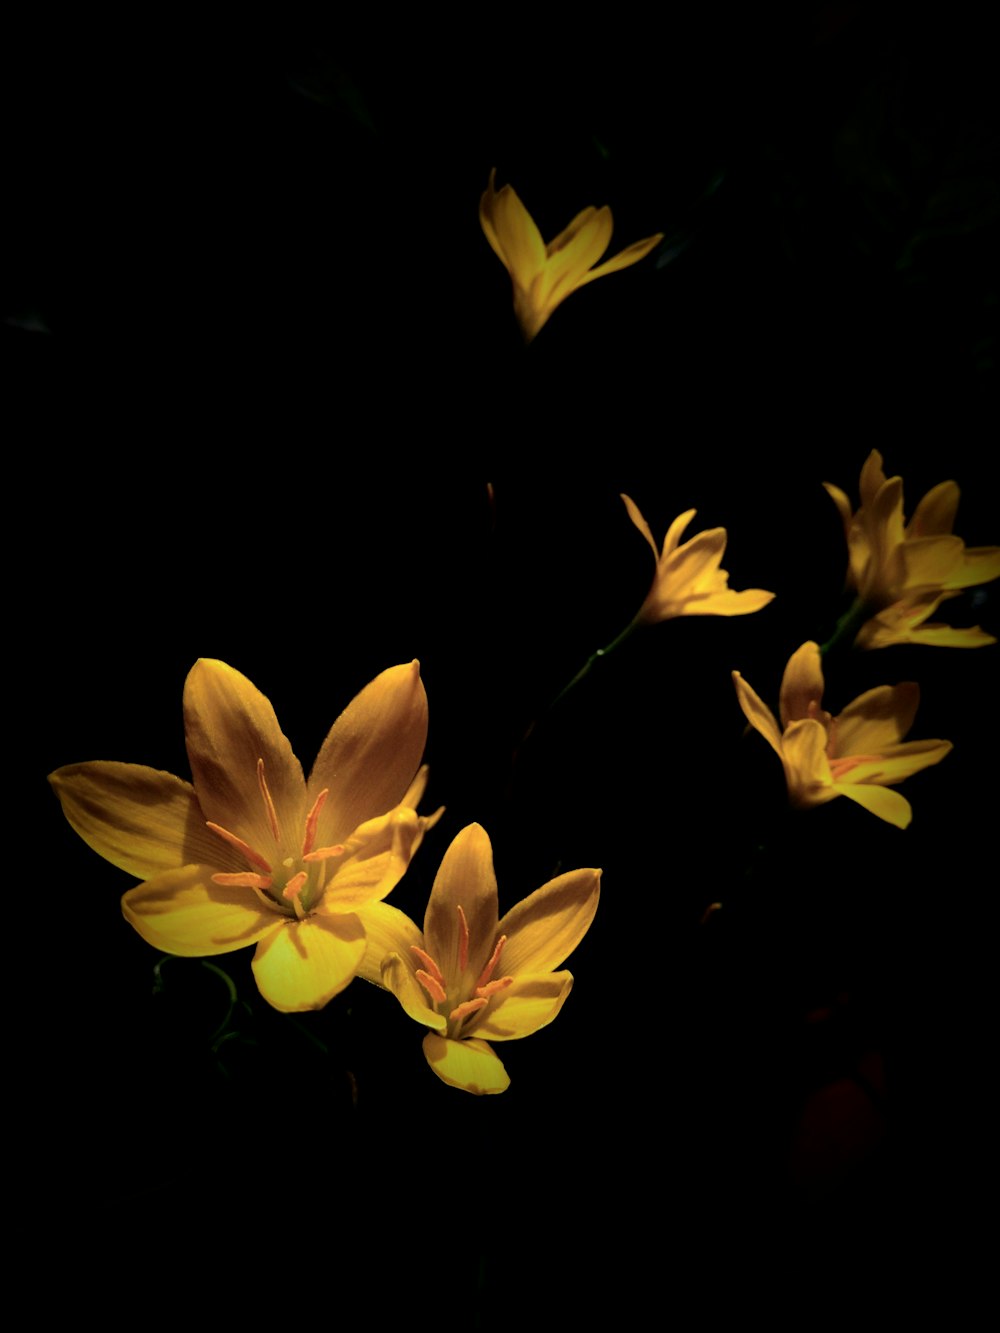 yellow and white flower in black background